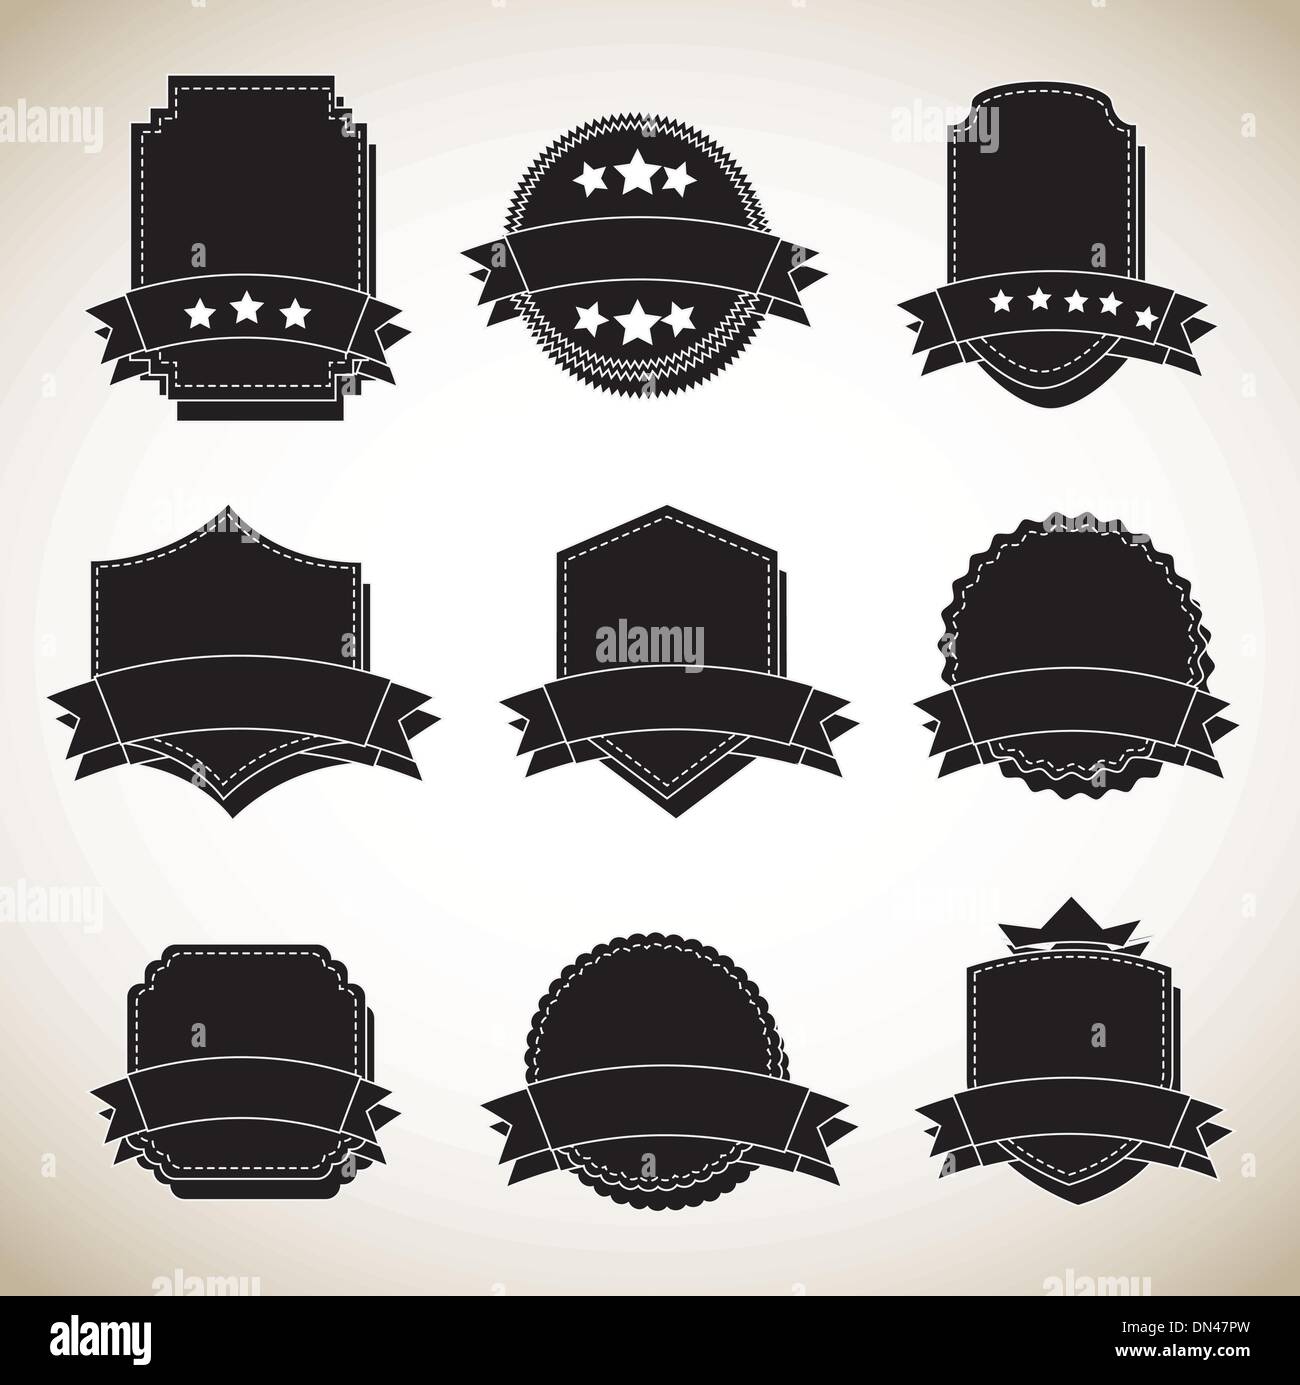 Old fashioned labels Stock Vector Images - Alamy